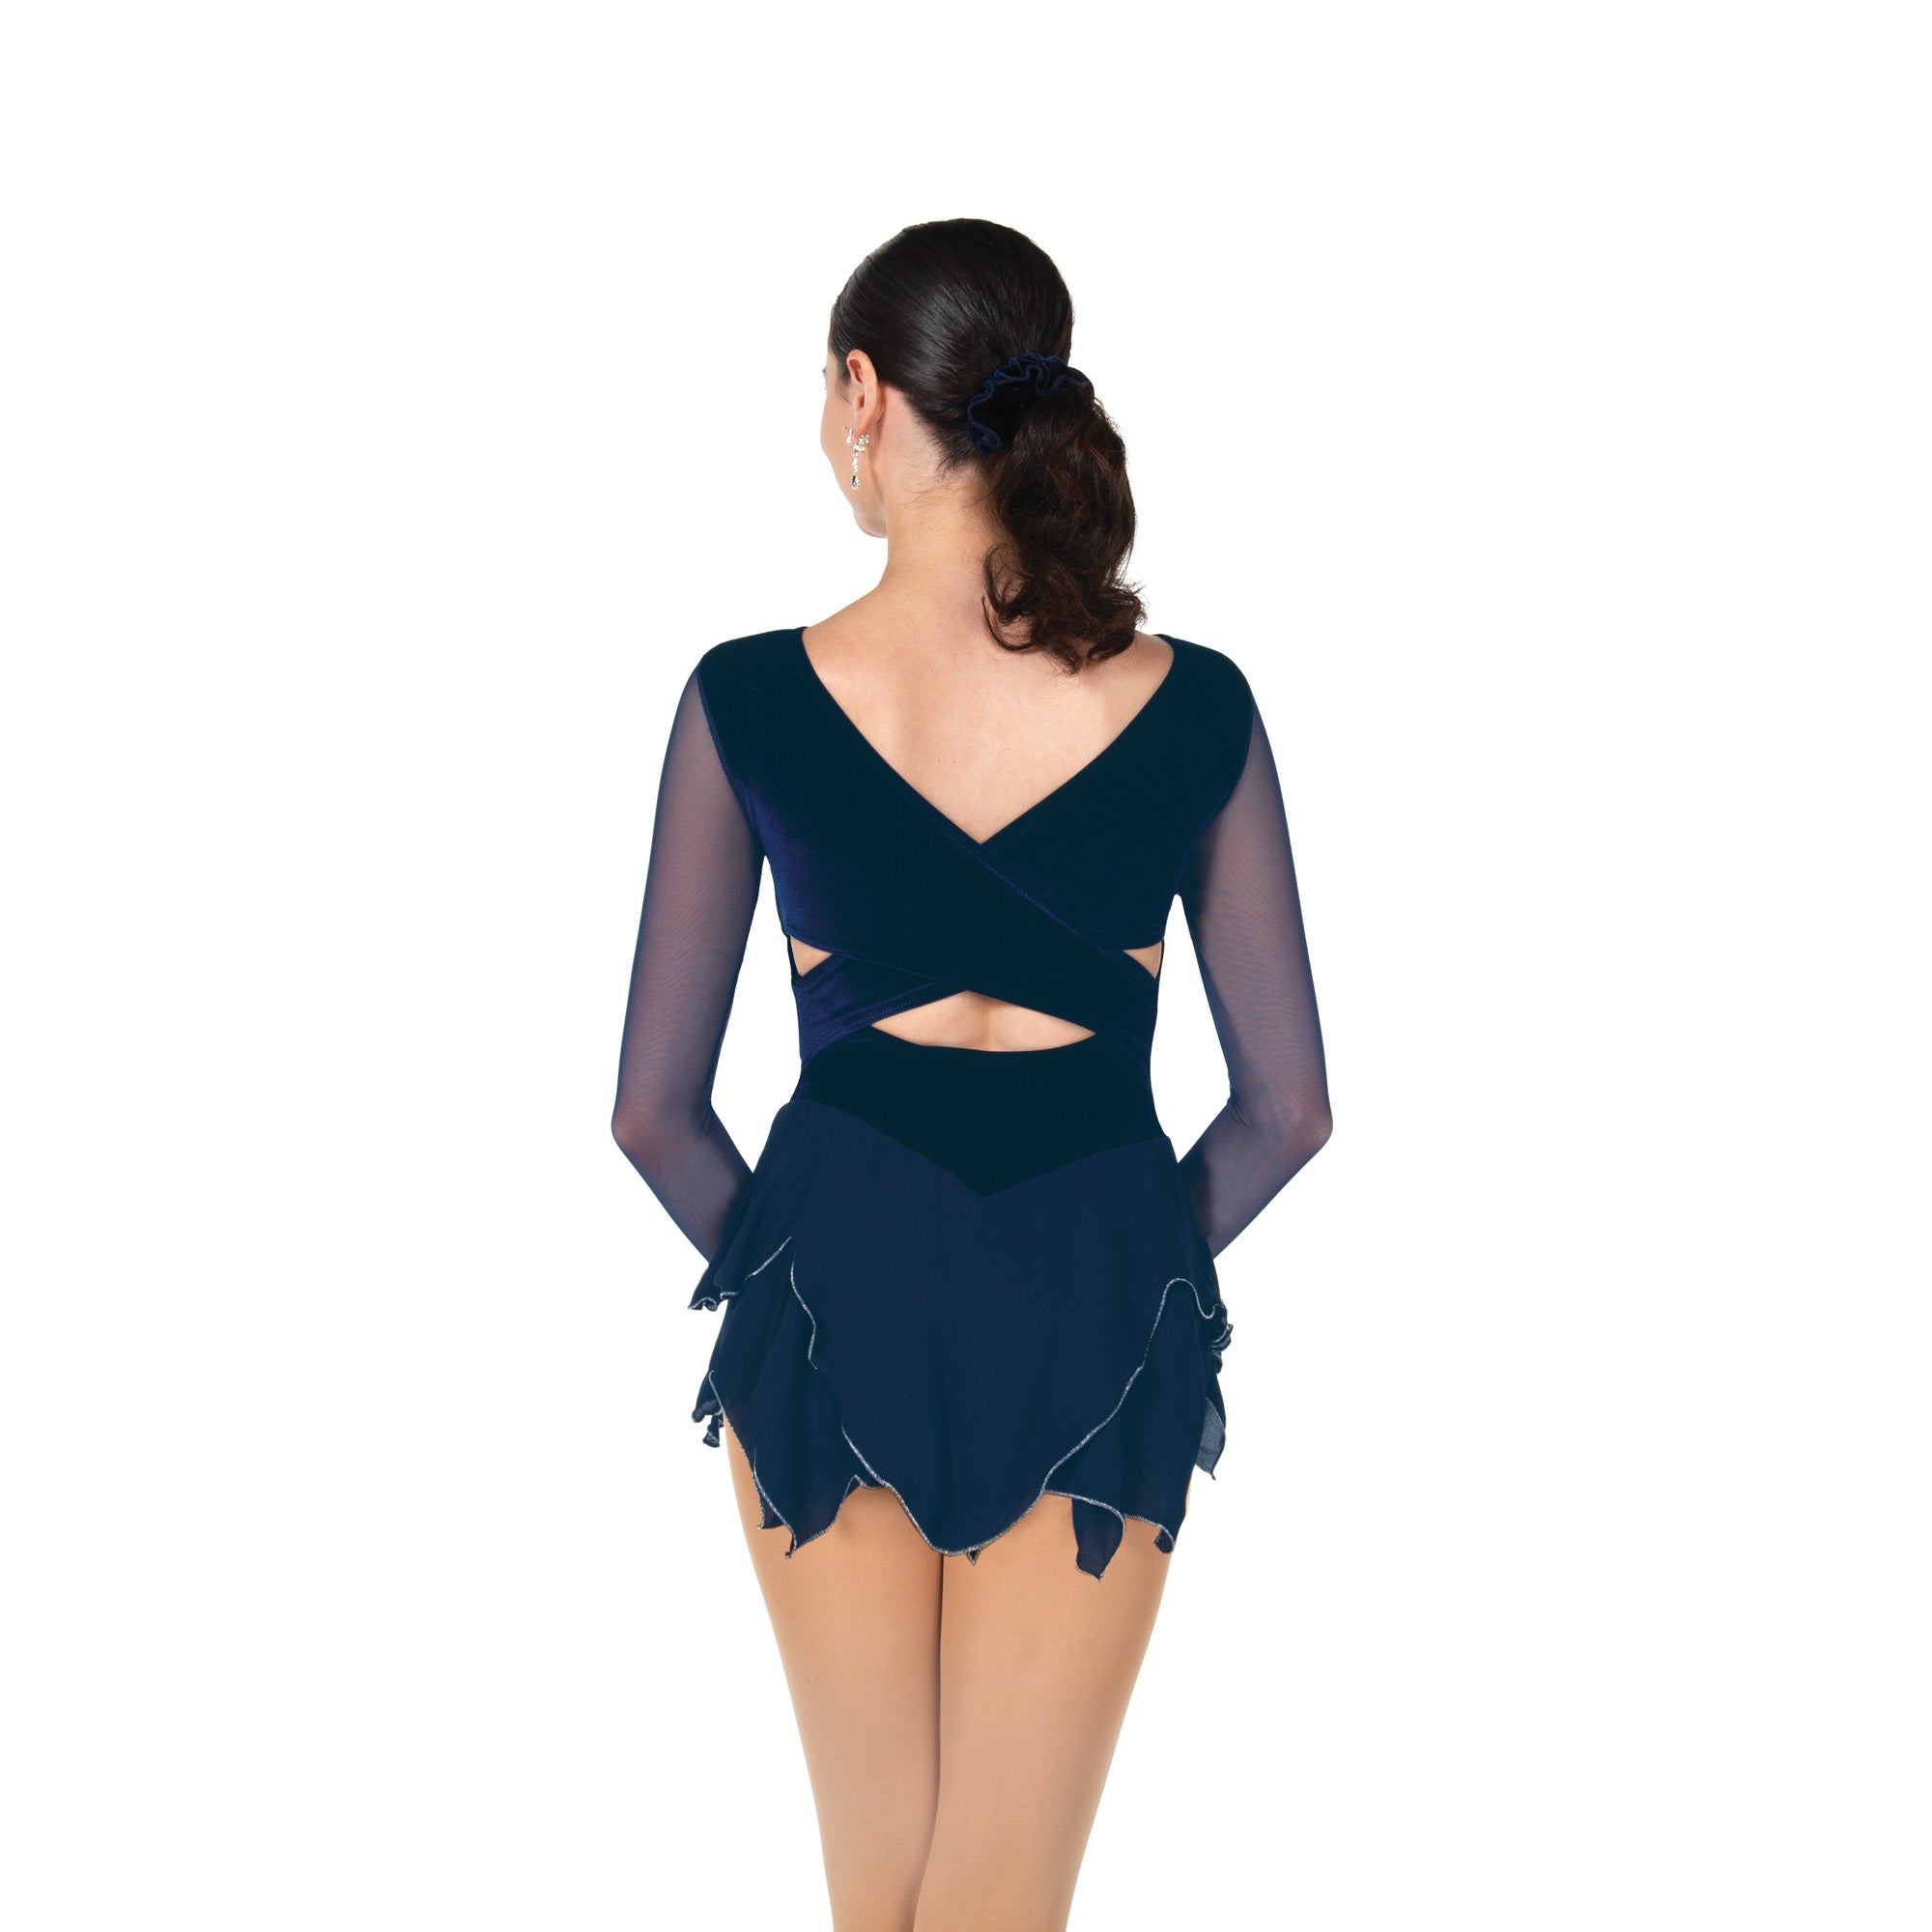 85 Demi-Pointe Skating Dress in Navy Blue by Jerry's